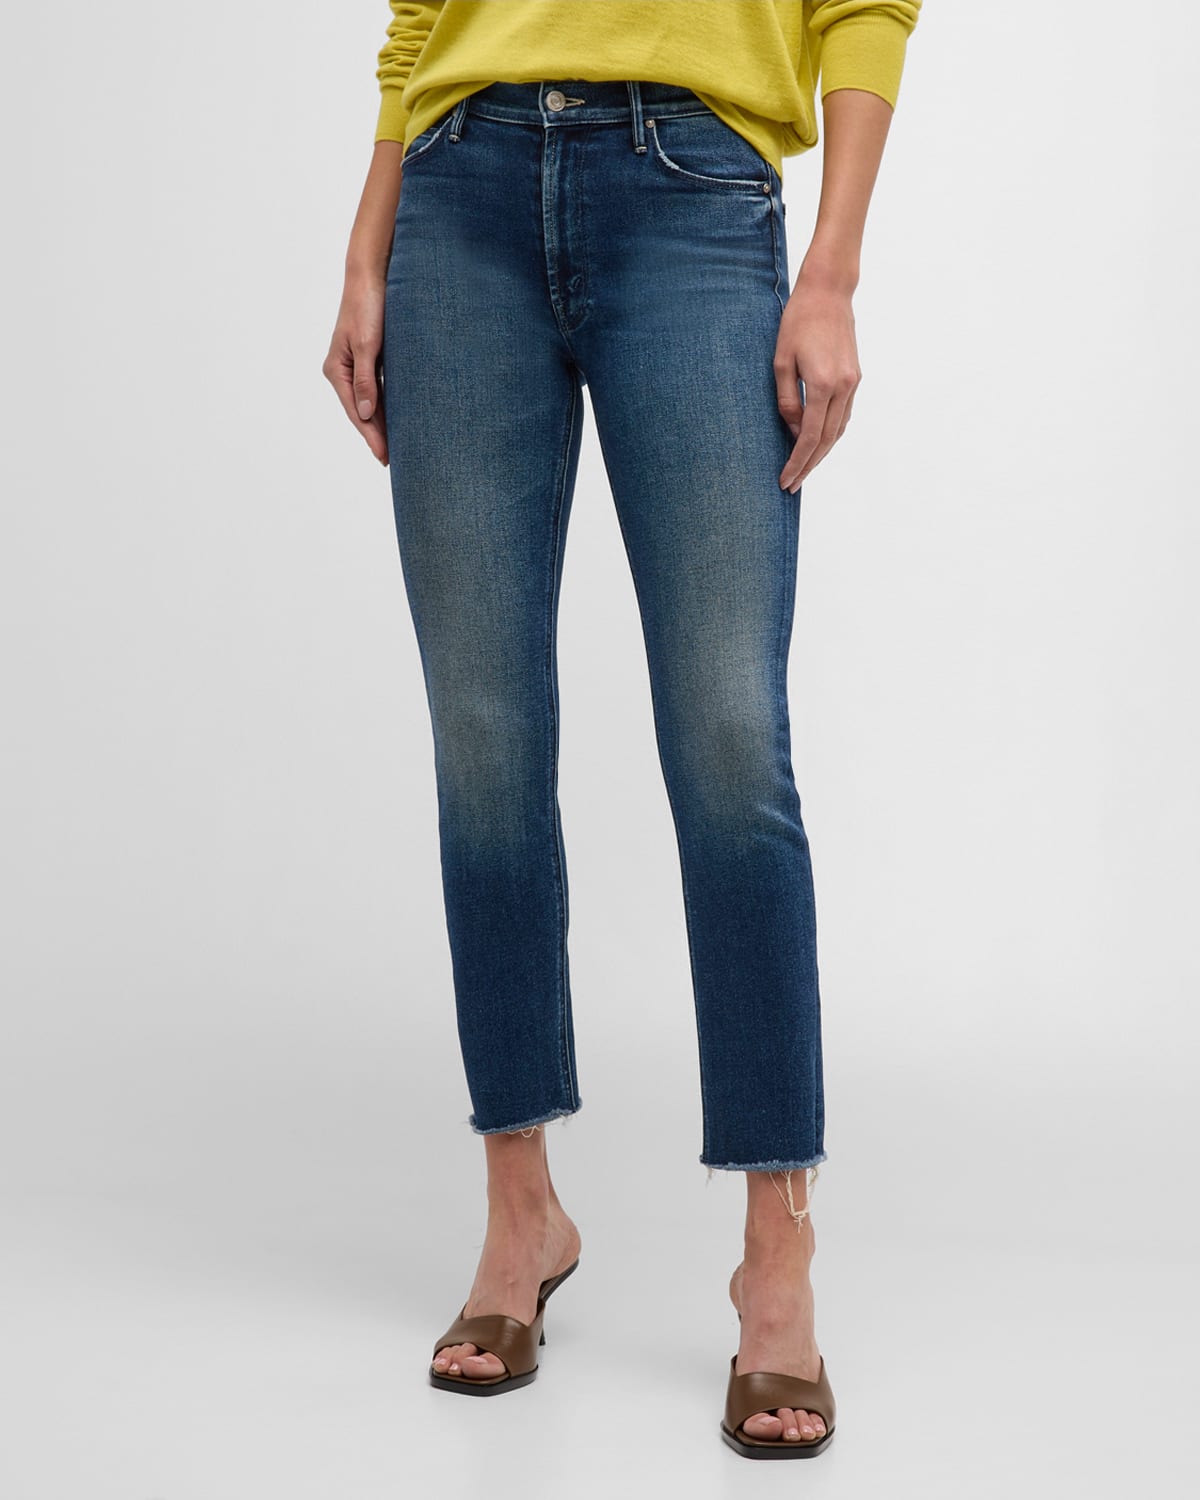 The Mid-Rise Dazzler Ankle Fray Jeans